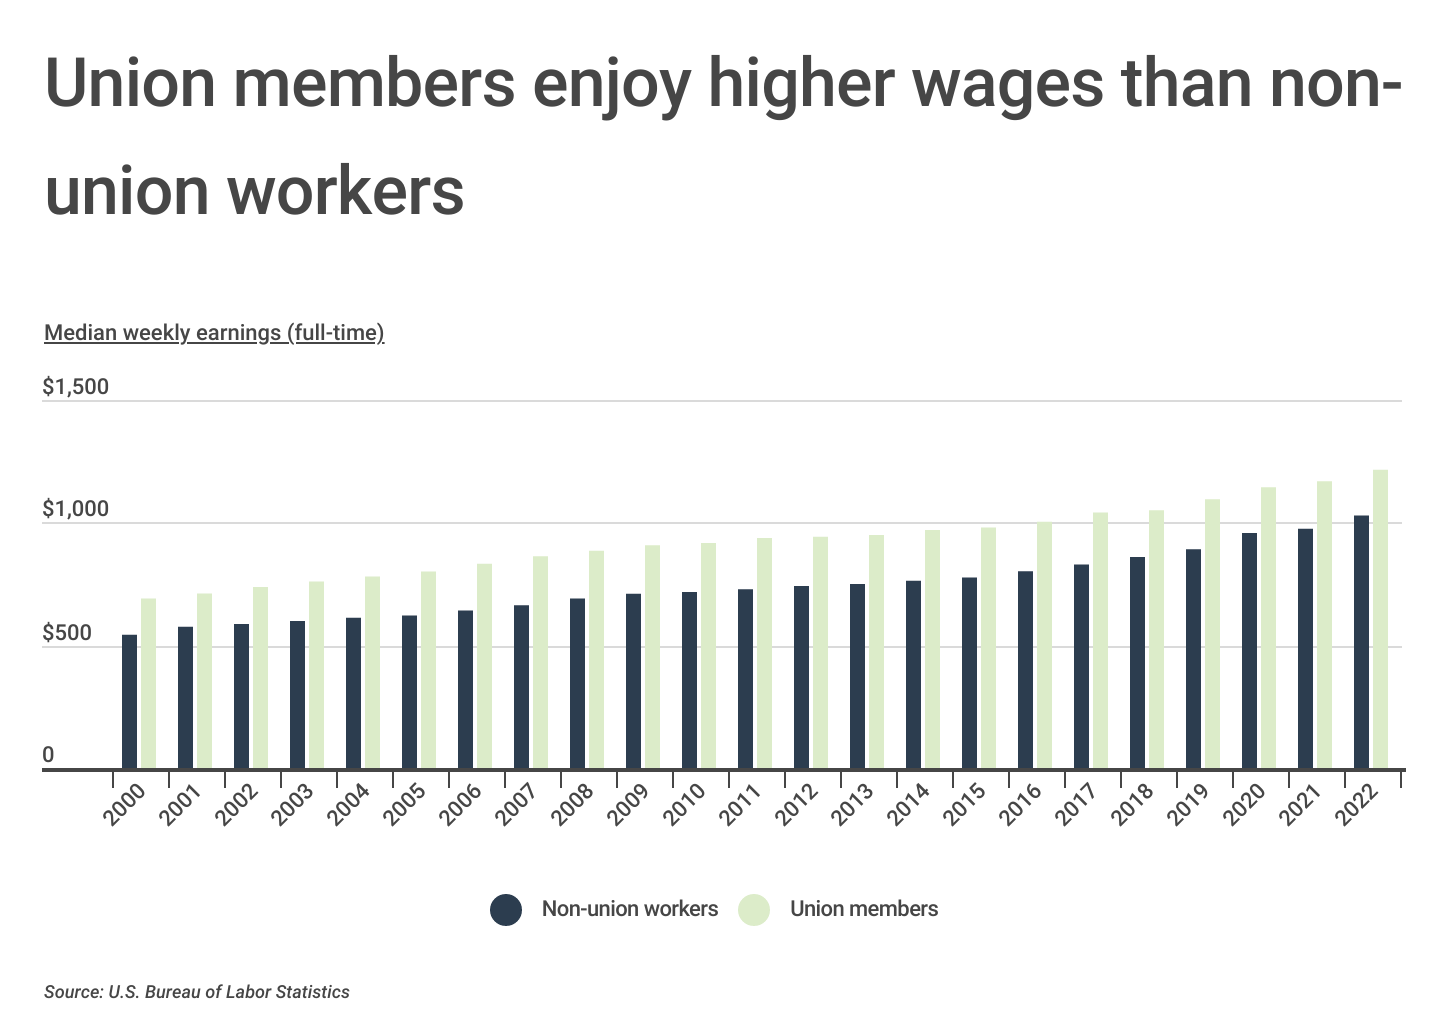 Chart1_Union members enjoy higher wages than non-union workers